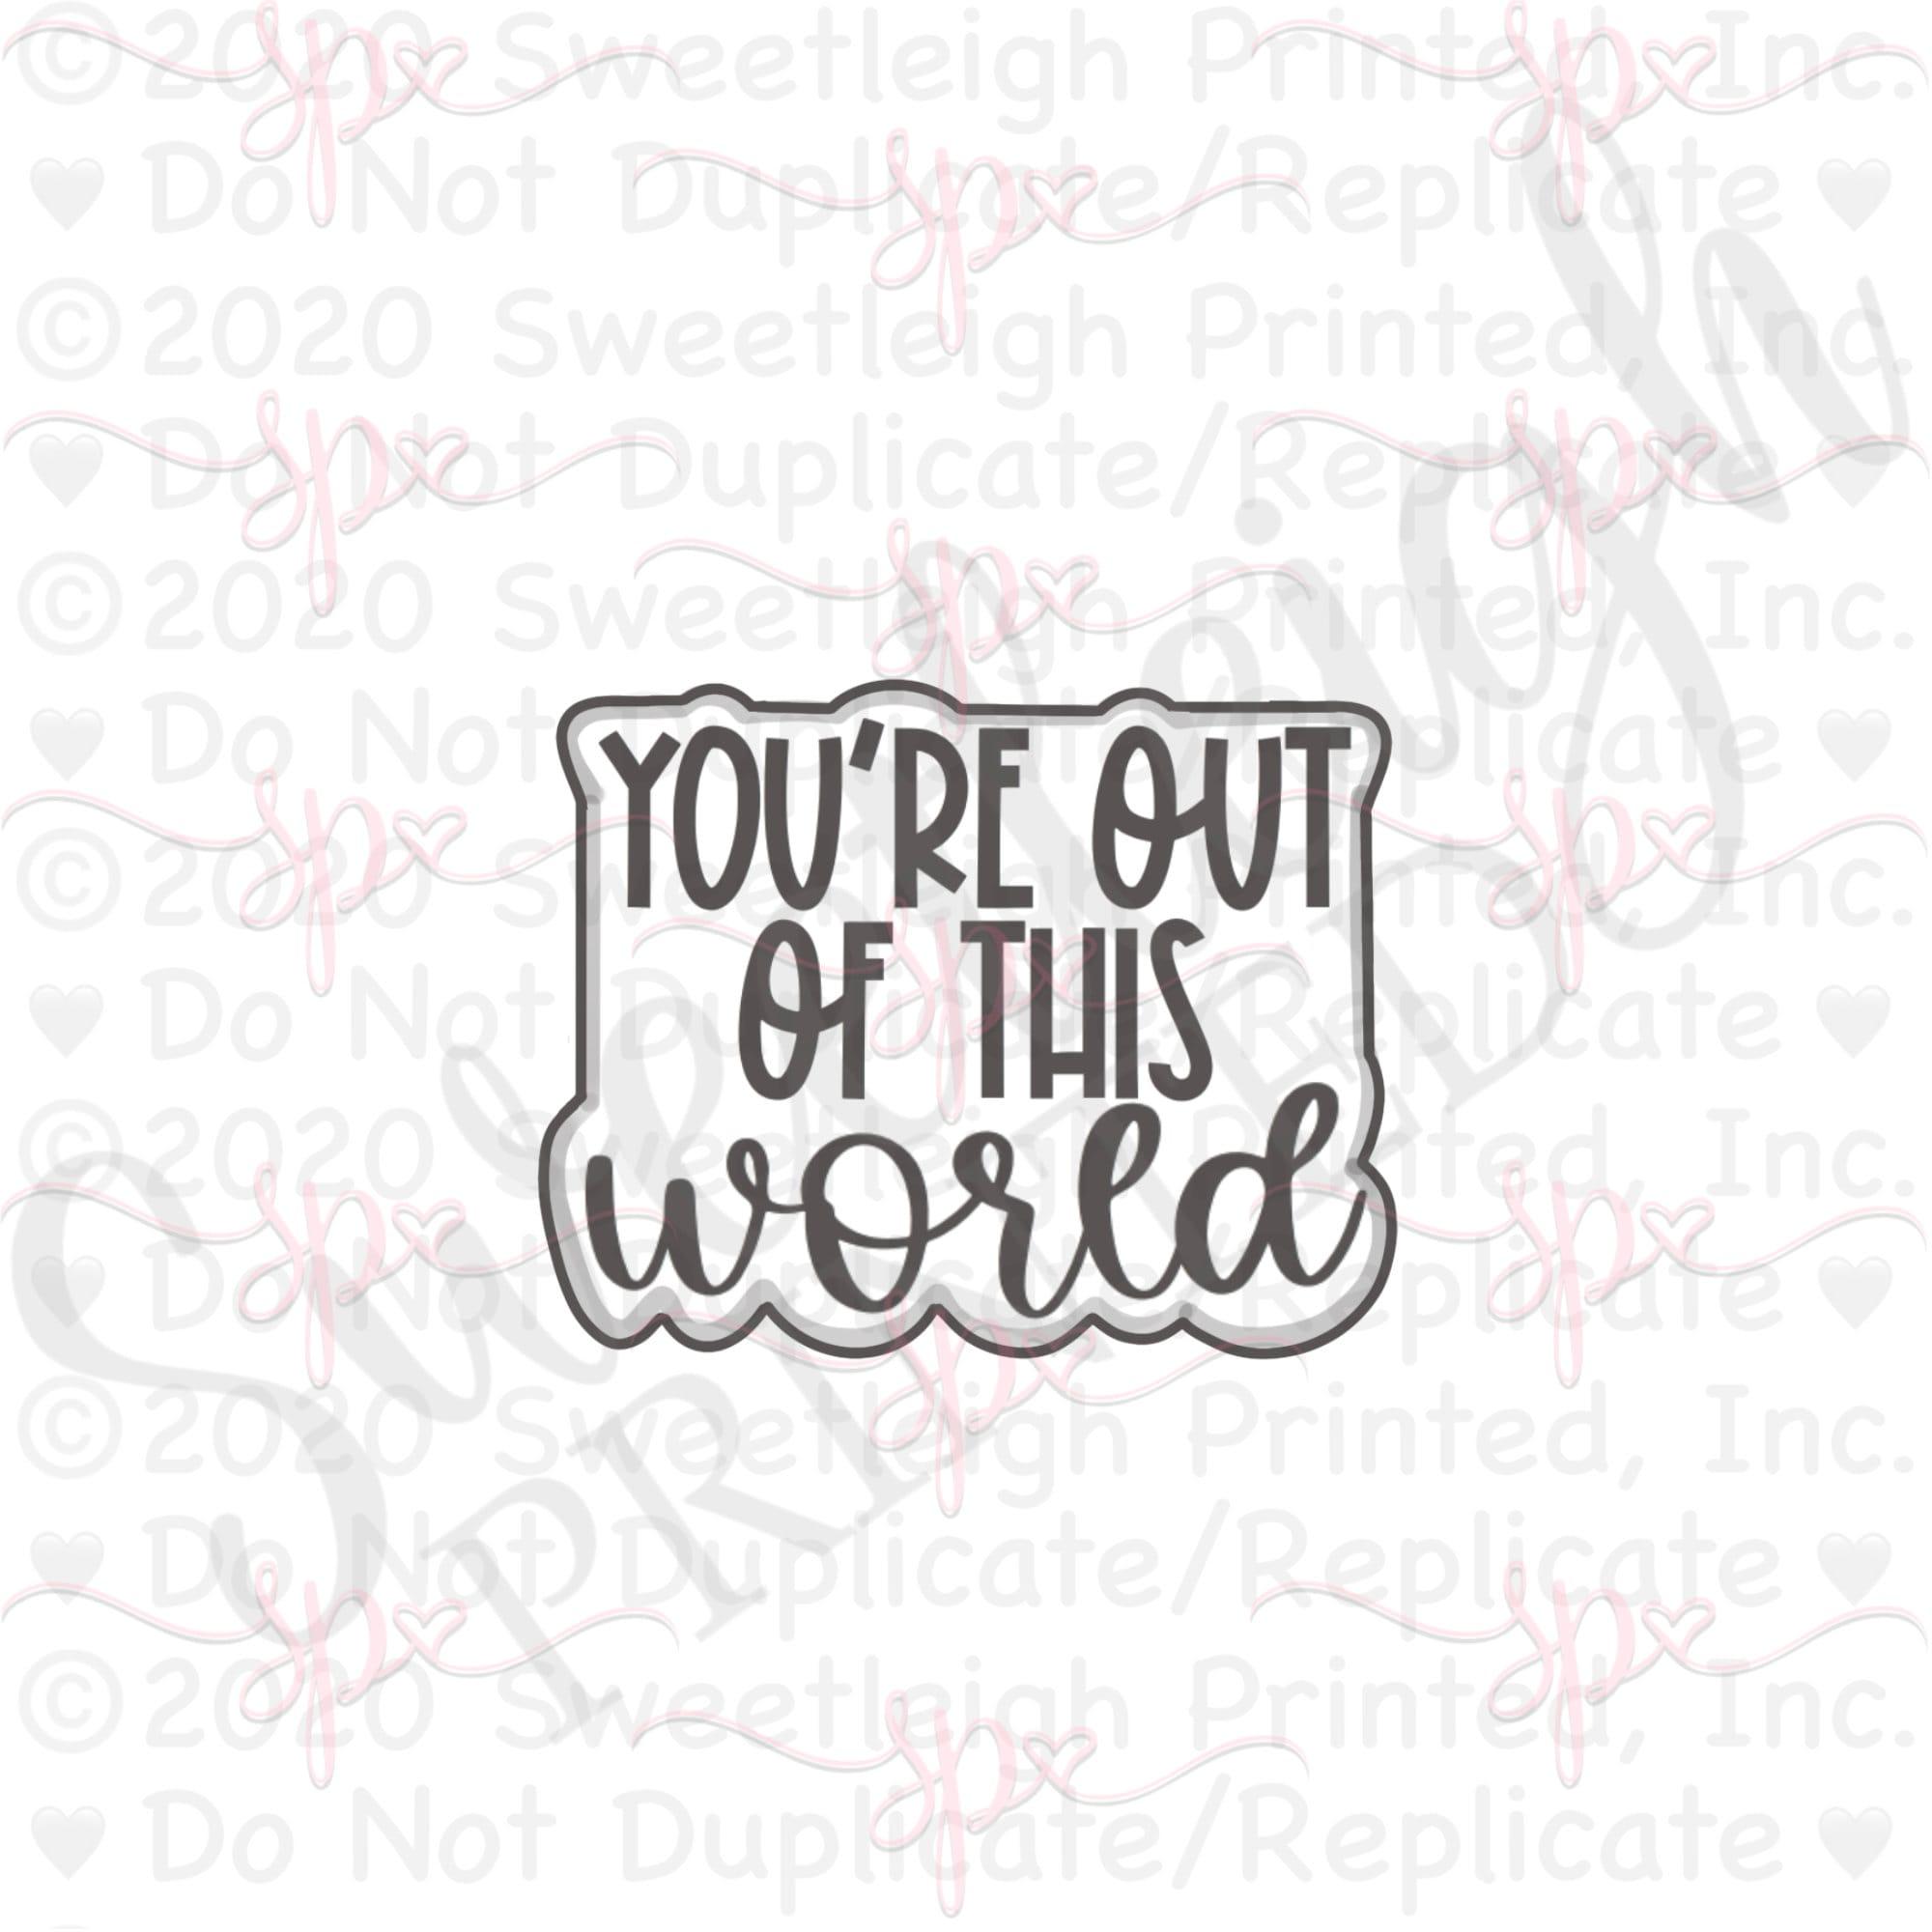 You're Out of This World Hand Lettered Cookie Cutter - Sweetleigh 